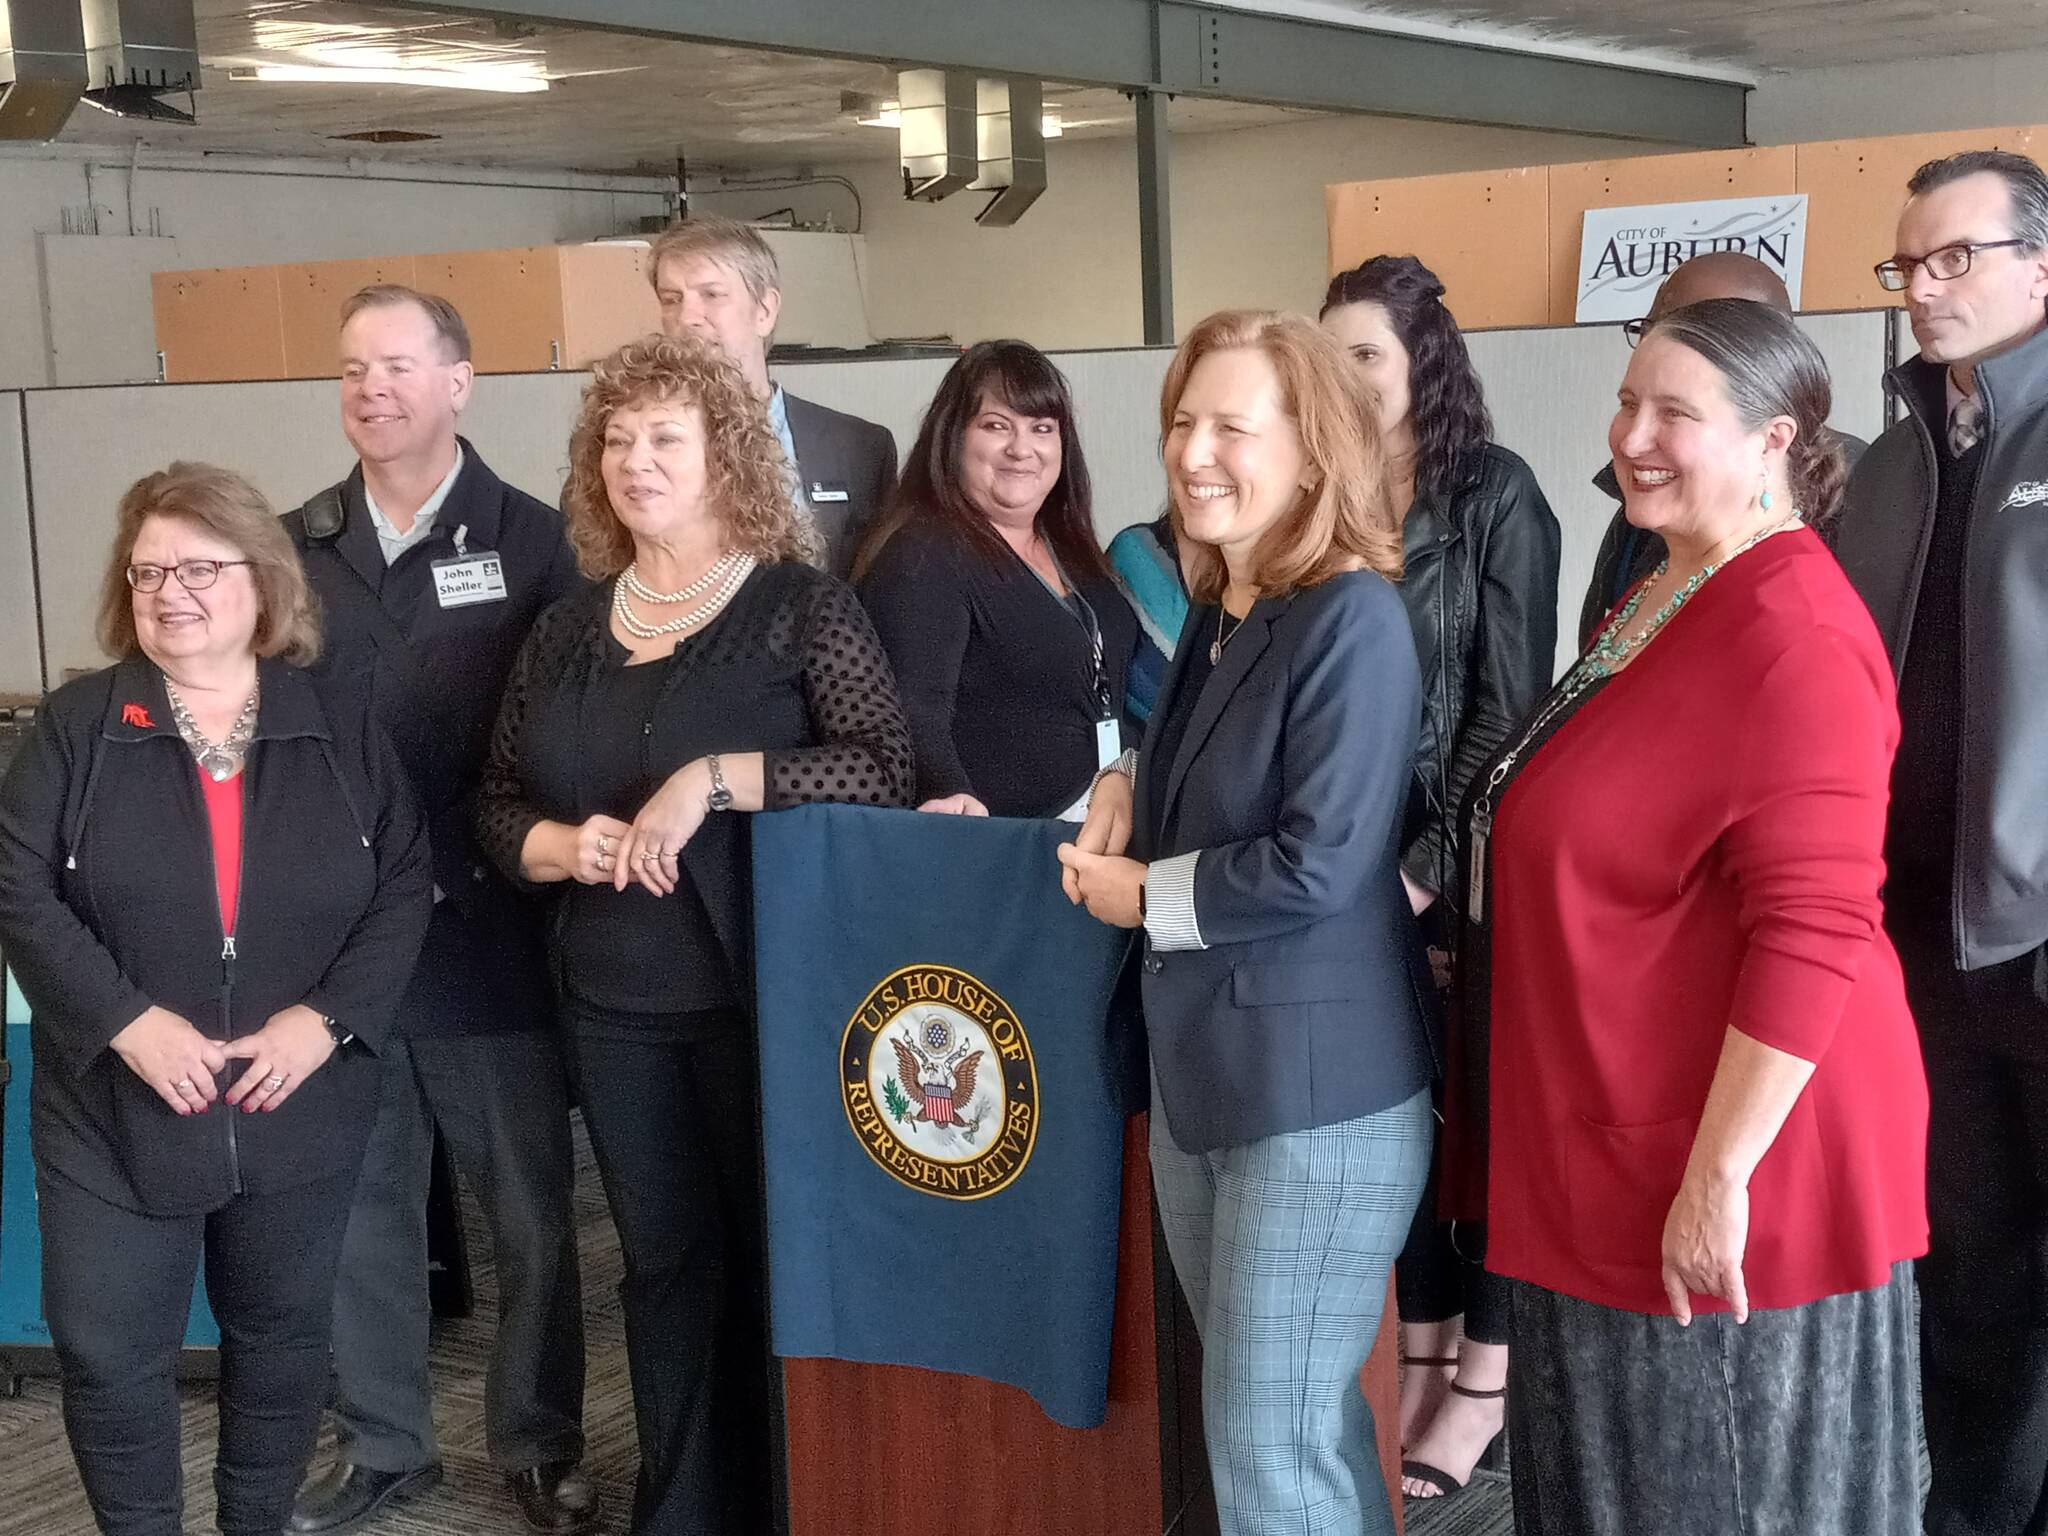 Photo by Robert Whale, Auburn Reporter
City officials and care providers laud U.S. Congresswoman Kim Schrier (D-District 8) for securing $500,000 in federal funds for the build-out of the Auburn Community Resource Center at a press conference April 14.